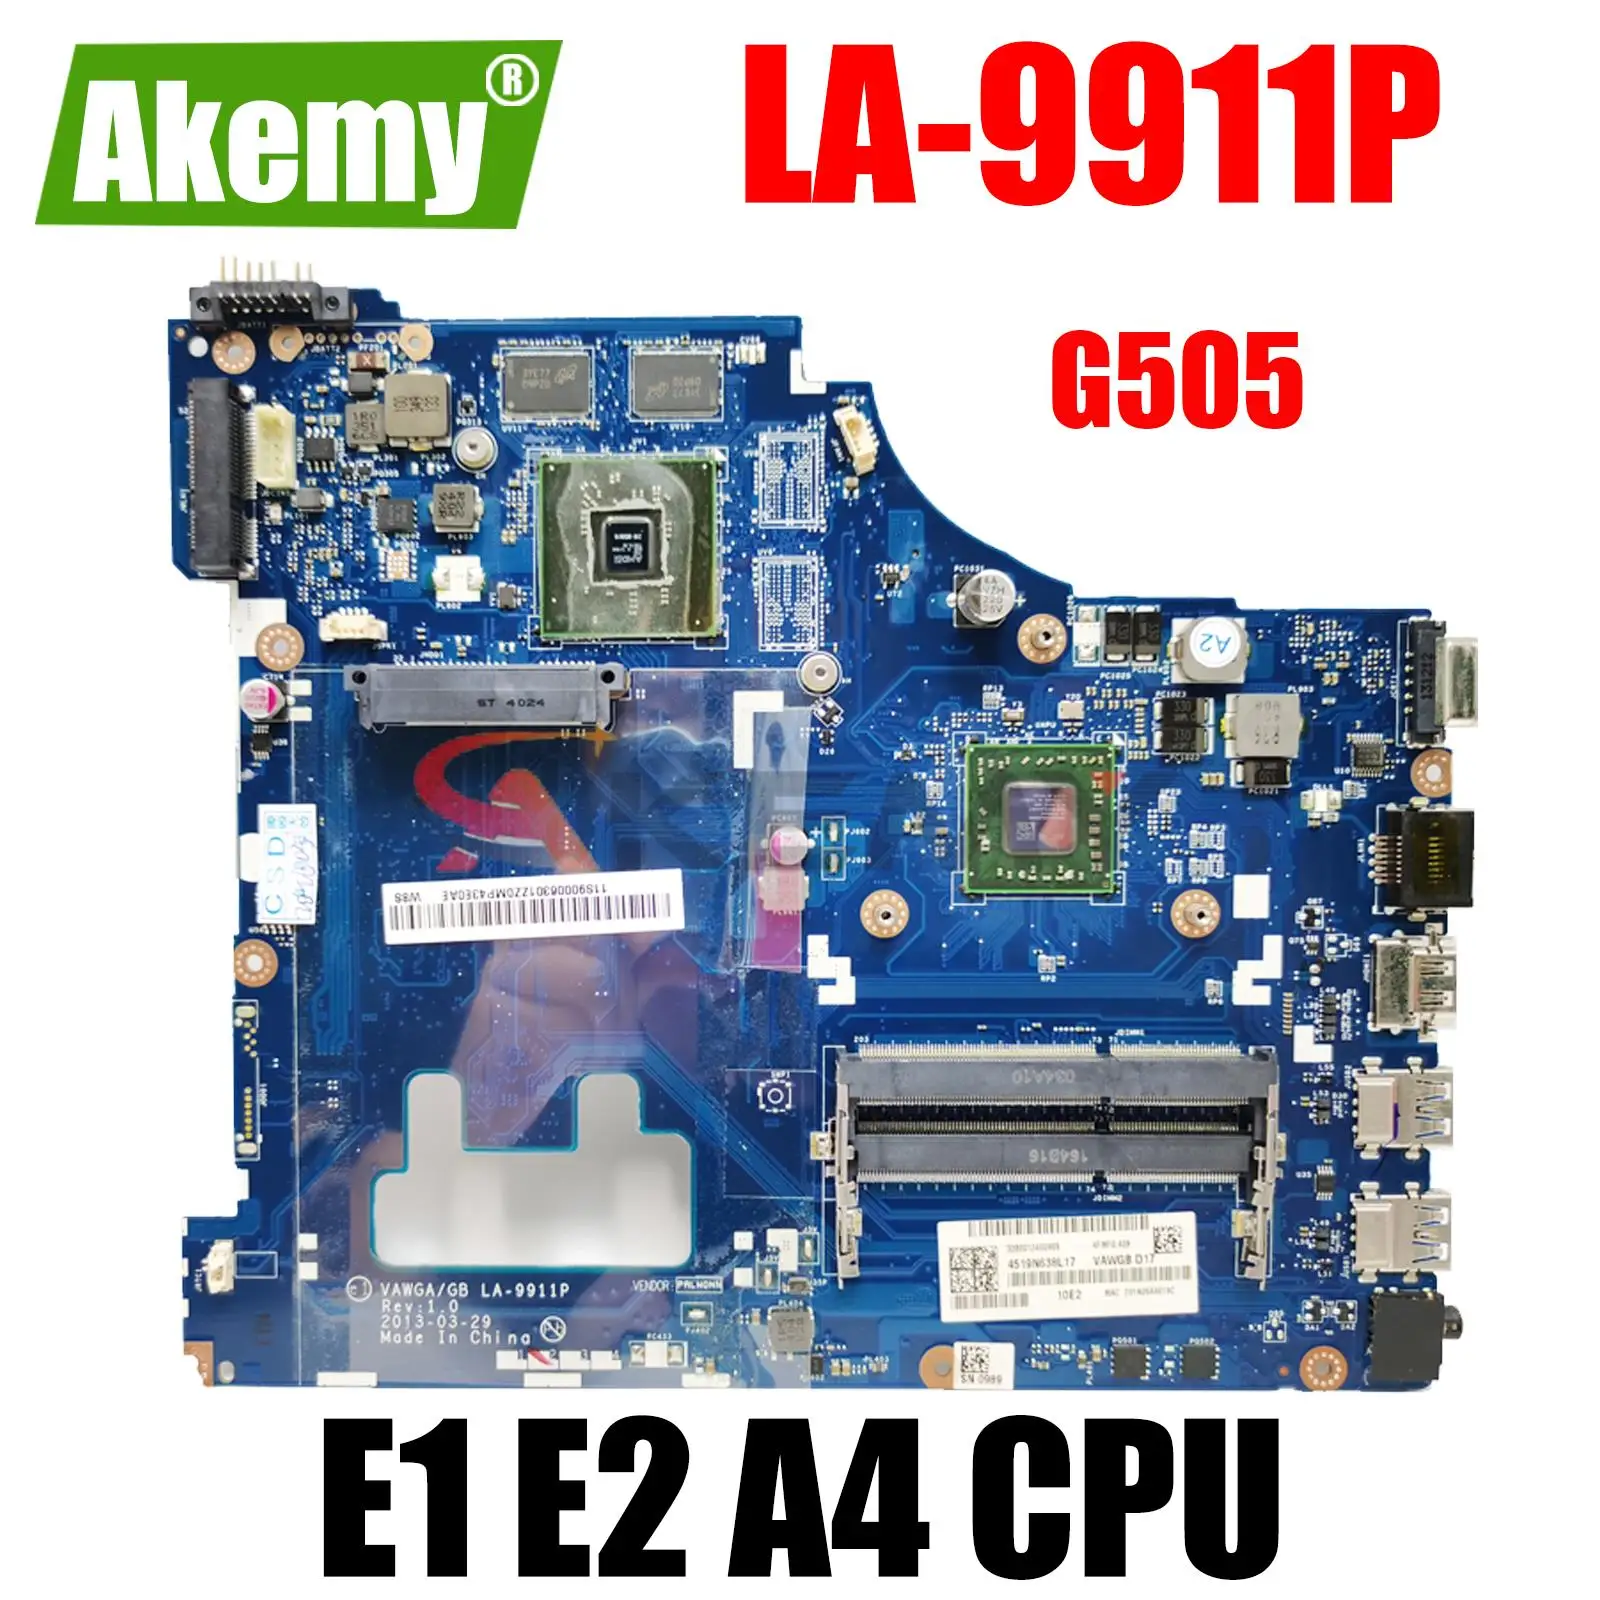 

VAWGA/GB LA-9911P motherboard.For Lenovo G405 G505 notebook motherboard With E1 E2 A4 E6 AMD CPU .DDR3 100% test work